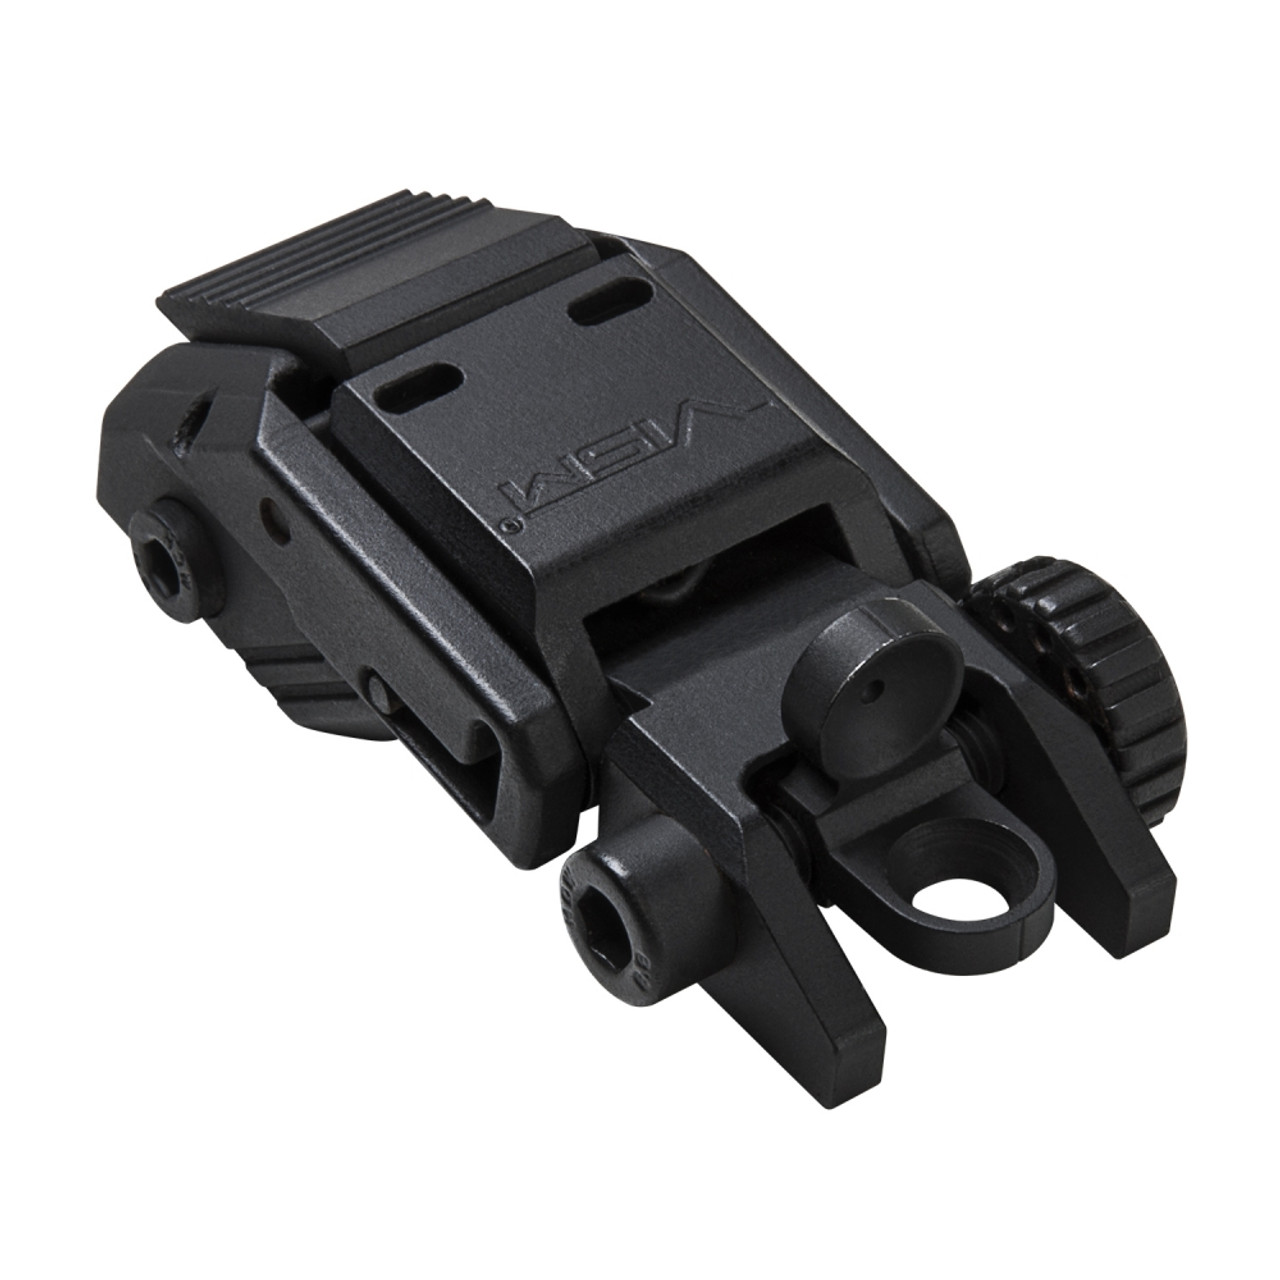 NcSTAR VMARFLR Pro Series Low Profile Spring Loaded Flip-Up Rear Sight W/A2 Aperture